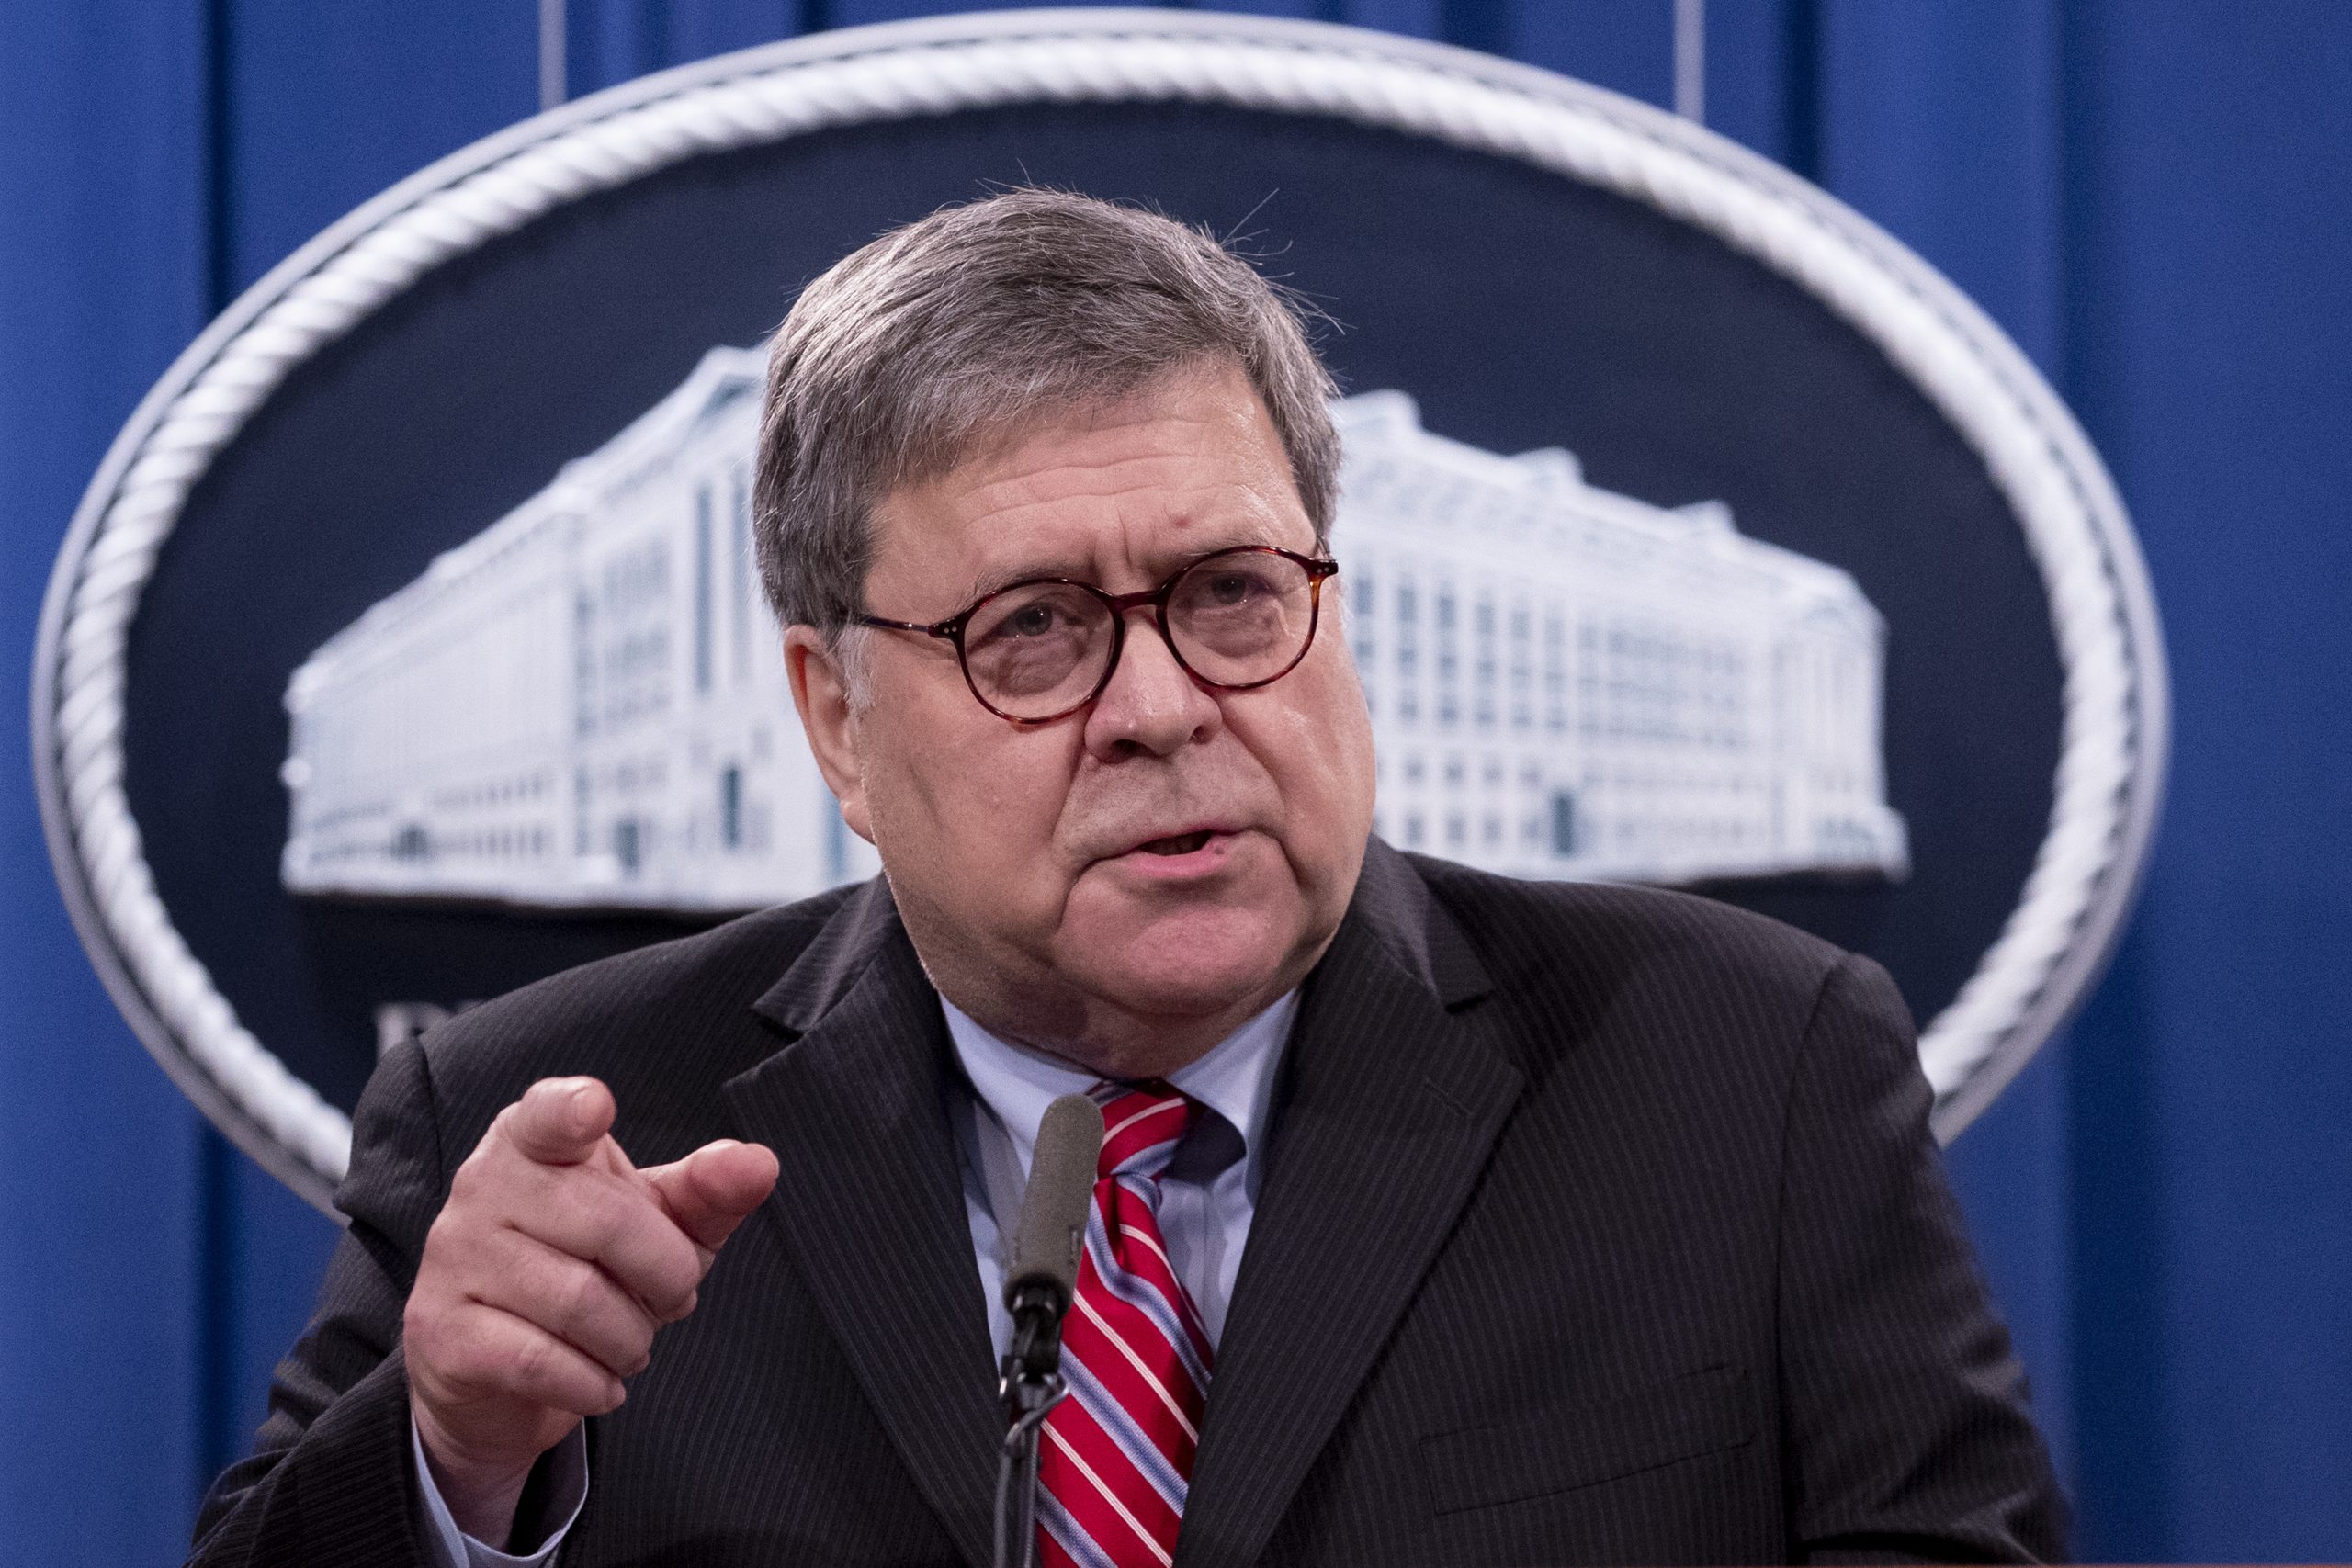 Former Attorney General William Barr has spoken to Jan. 6 panel, chair says